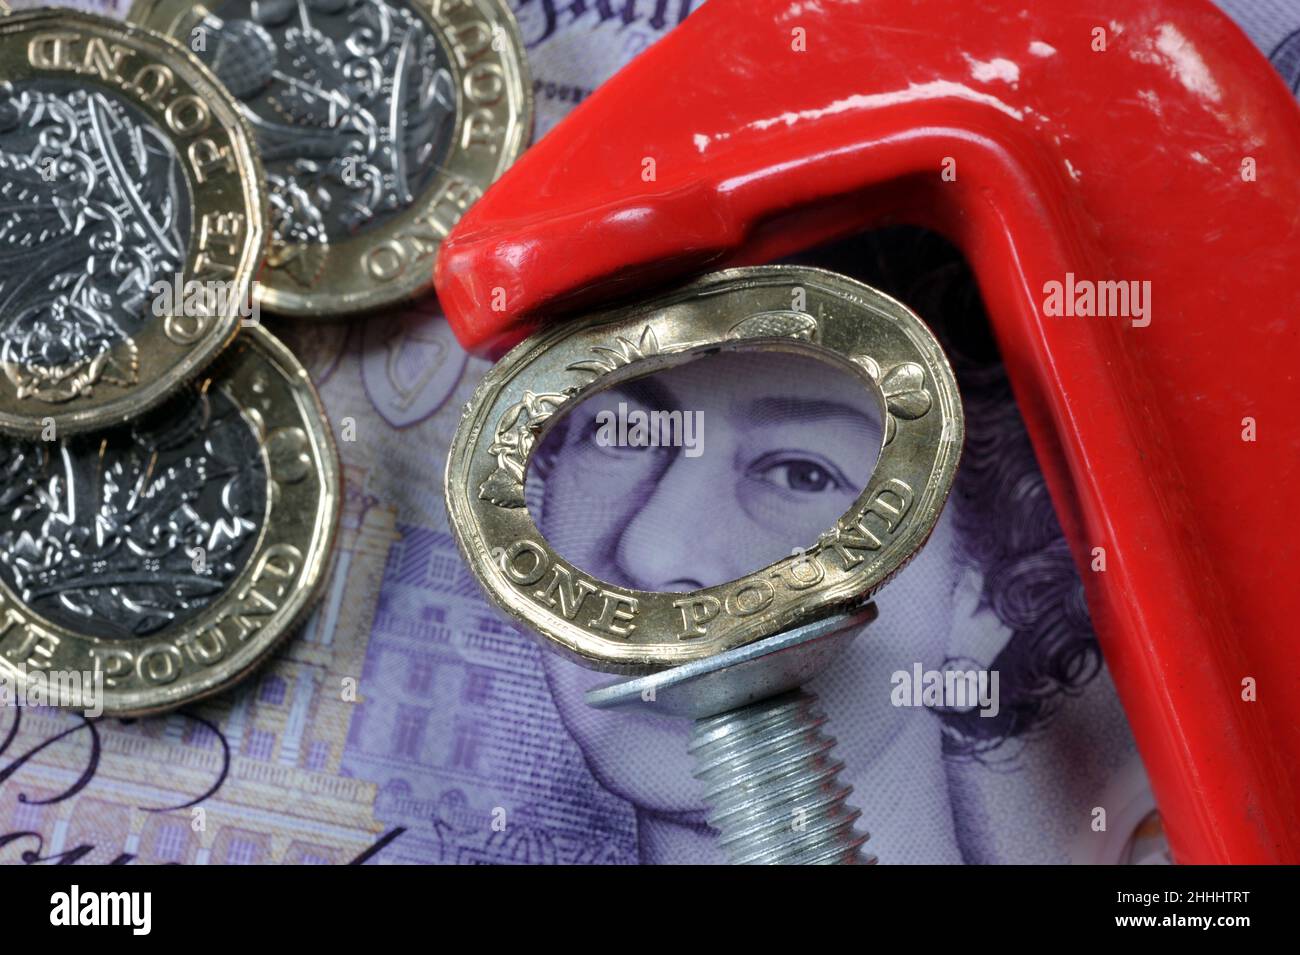 CRUSHED ONE POUND COIN IN JAWS OF A CLAMP RE THE ECONOMY COST OF LIVING WAGES INCOMES ETC UK Stock Photo